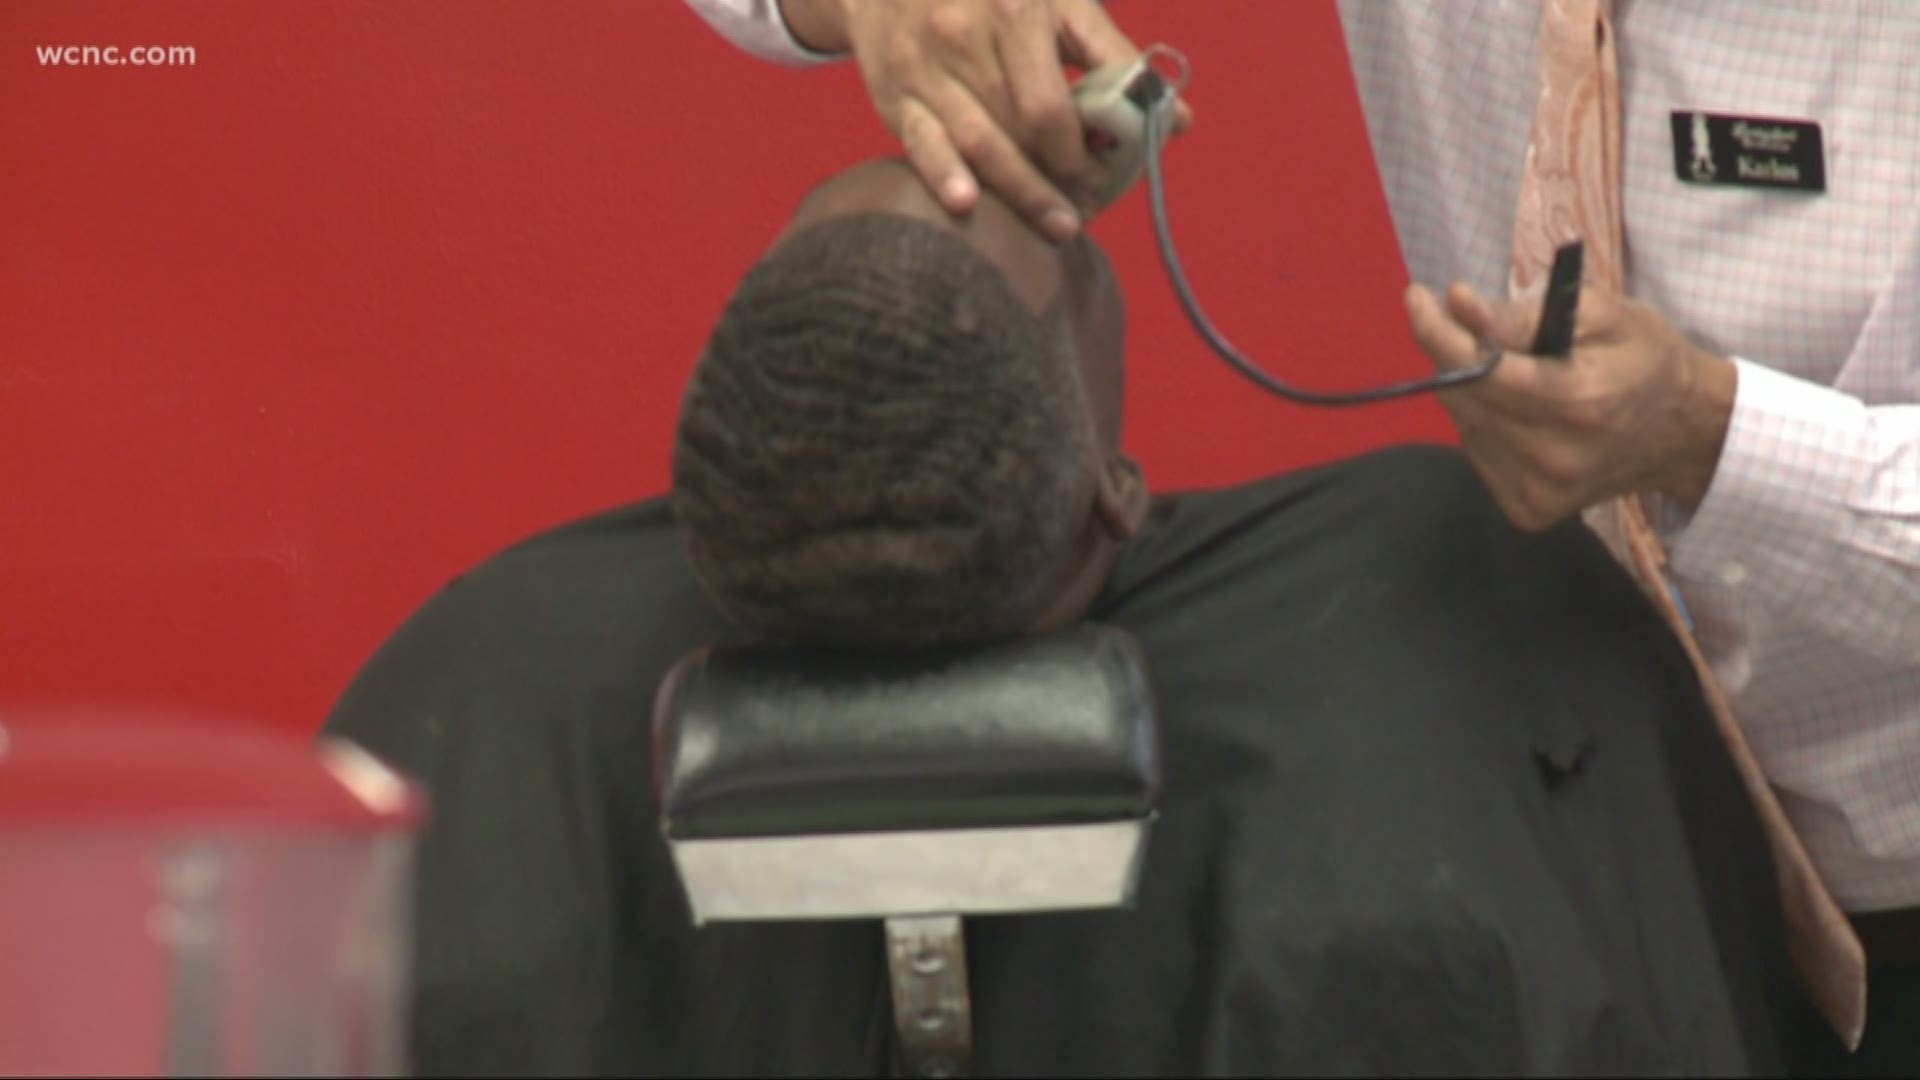 'Da Lucky Spot' is owned by Shaun Lucky Corbett, The first African American barbershop opened at Walmart in west charlotte.